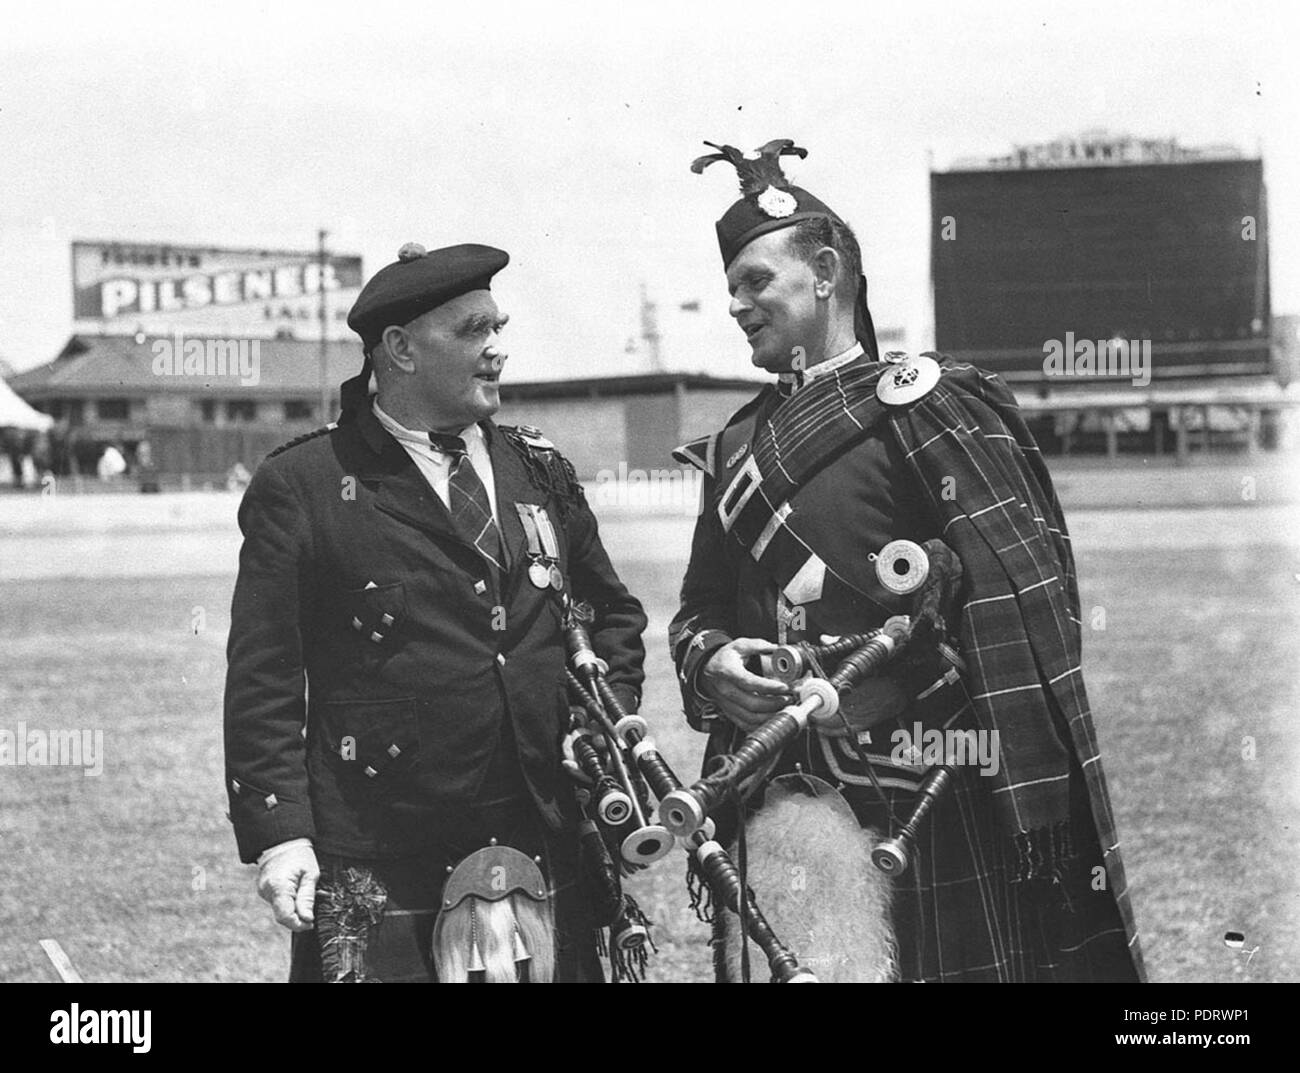 161 SLNSW 43462 Two Highland pipers talking together at the Highland Societys Caledonian Games Stock Photo